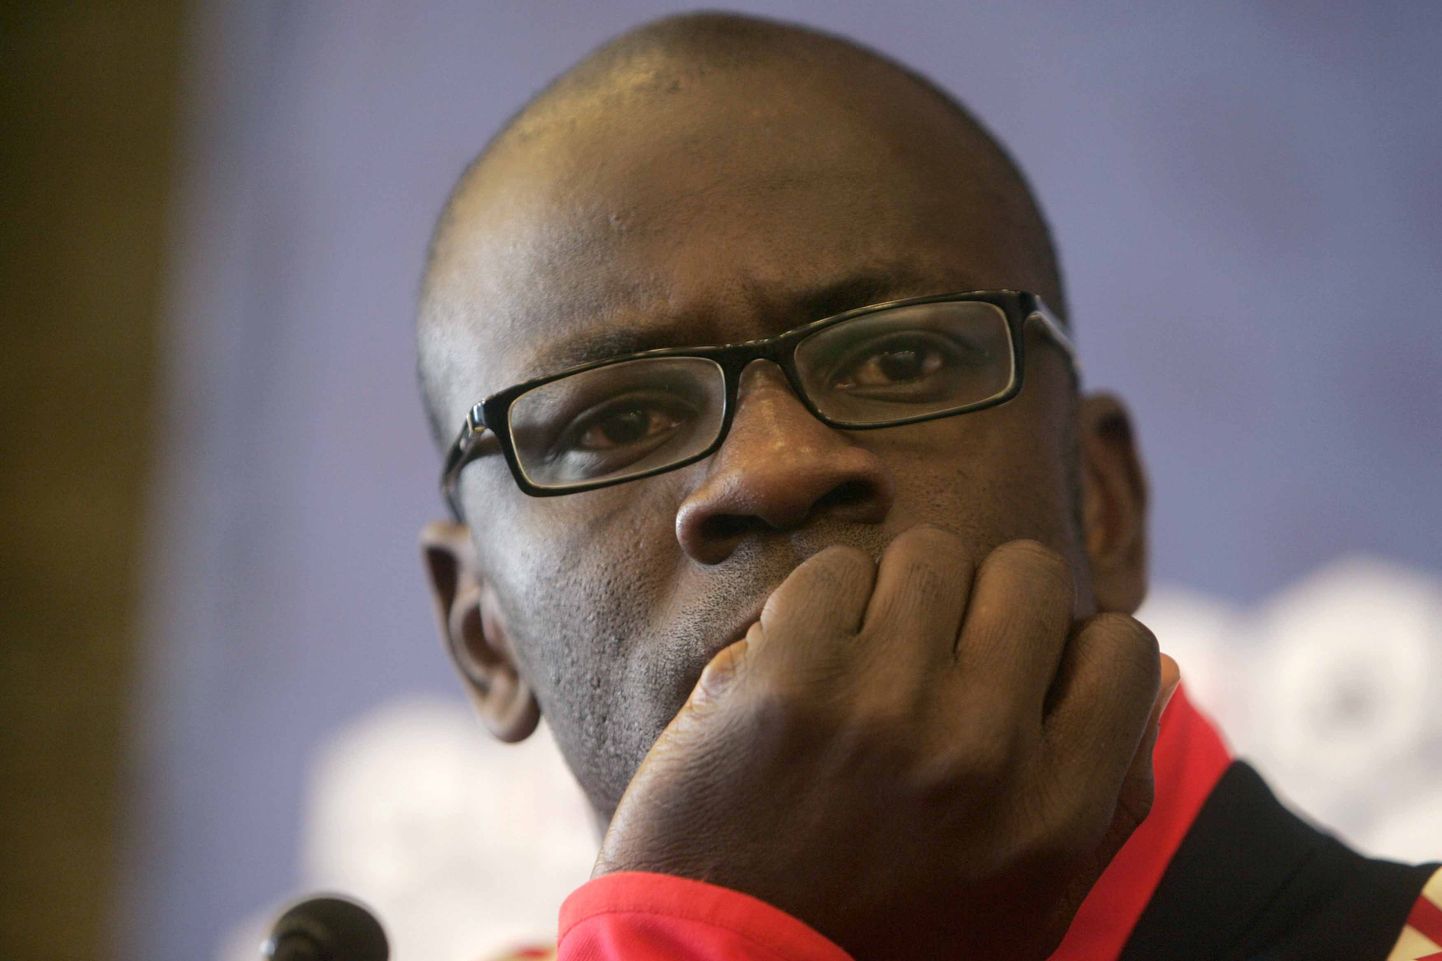 French soccer player Lilian Thuram, looks on,  during a press conference in the Alpine resort of Tignes Monday, May 26, 2008. France coach Raymond Domenech selected 30 players for a pre-tournament camp in the Alpine ski resort of Tignes, where he will cut seven players for his final 23-man squad for Euro 2008 in Austria and Switzerland on May 28. (AP Photo/Michel Euler) / SCANPIX Code: 436